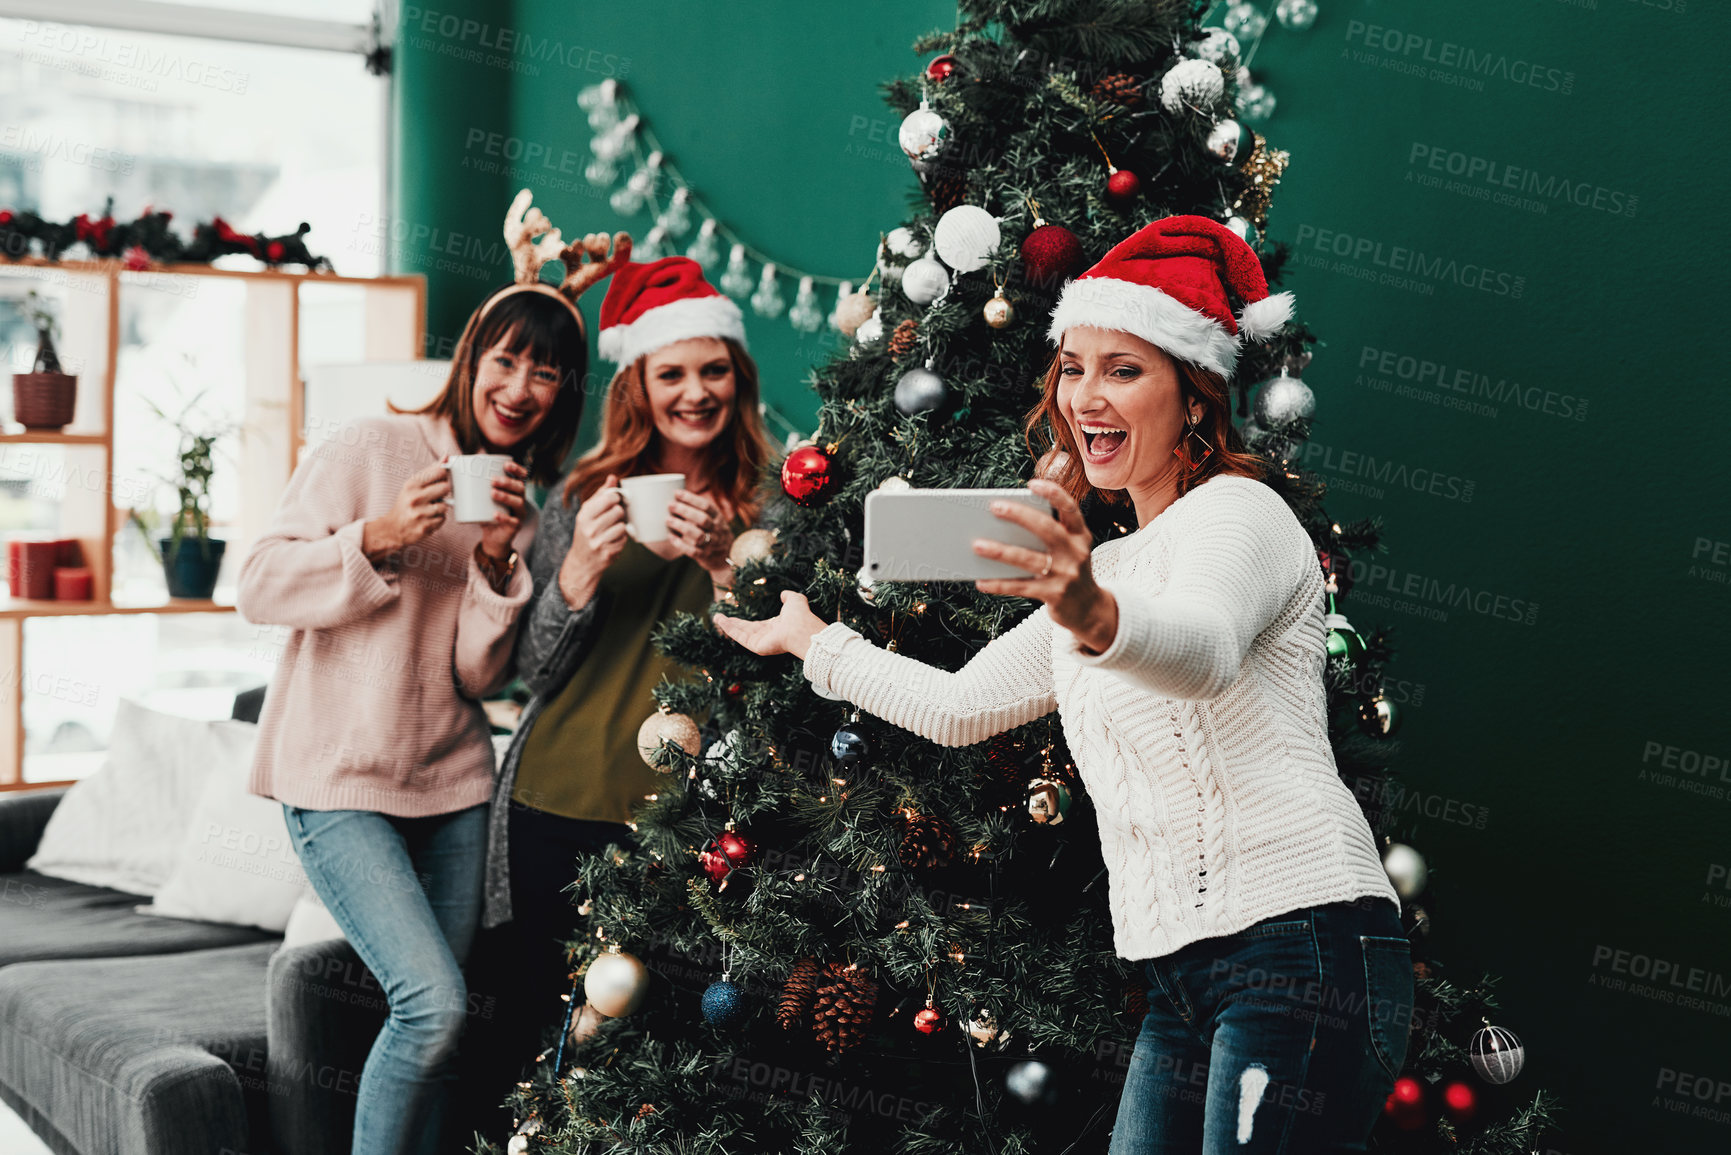 Buy stock photo Cropped shot of three attractive middle aged women taking self portraits together with a cellphone at home during Christmas time